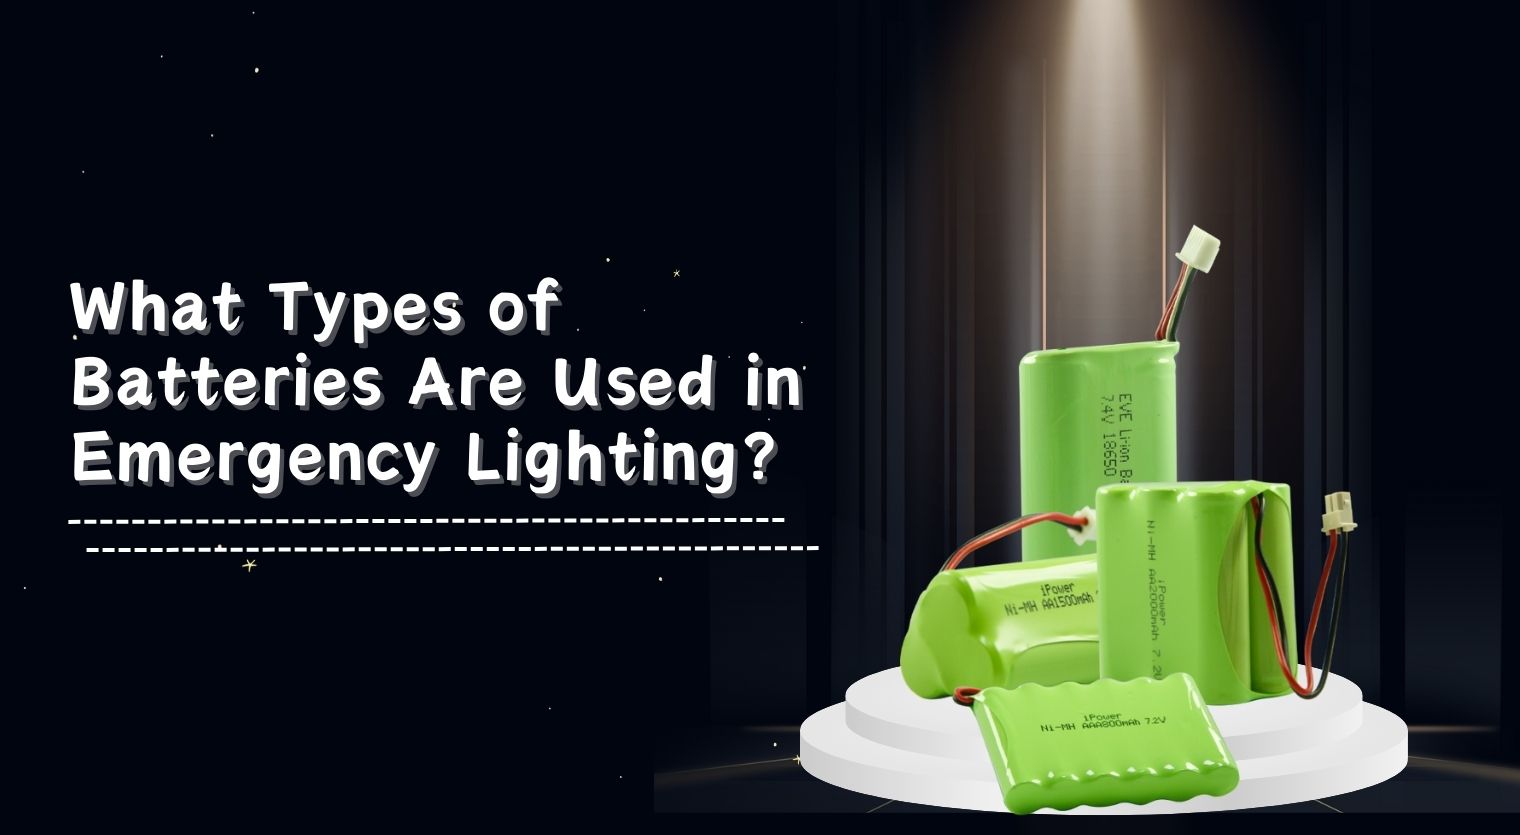 What Types of Batteries Are Used in Emergency Lighting